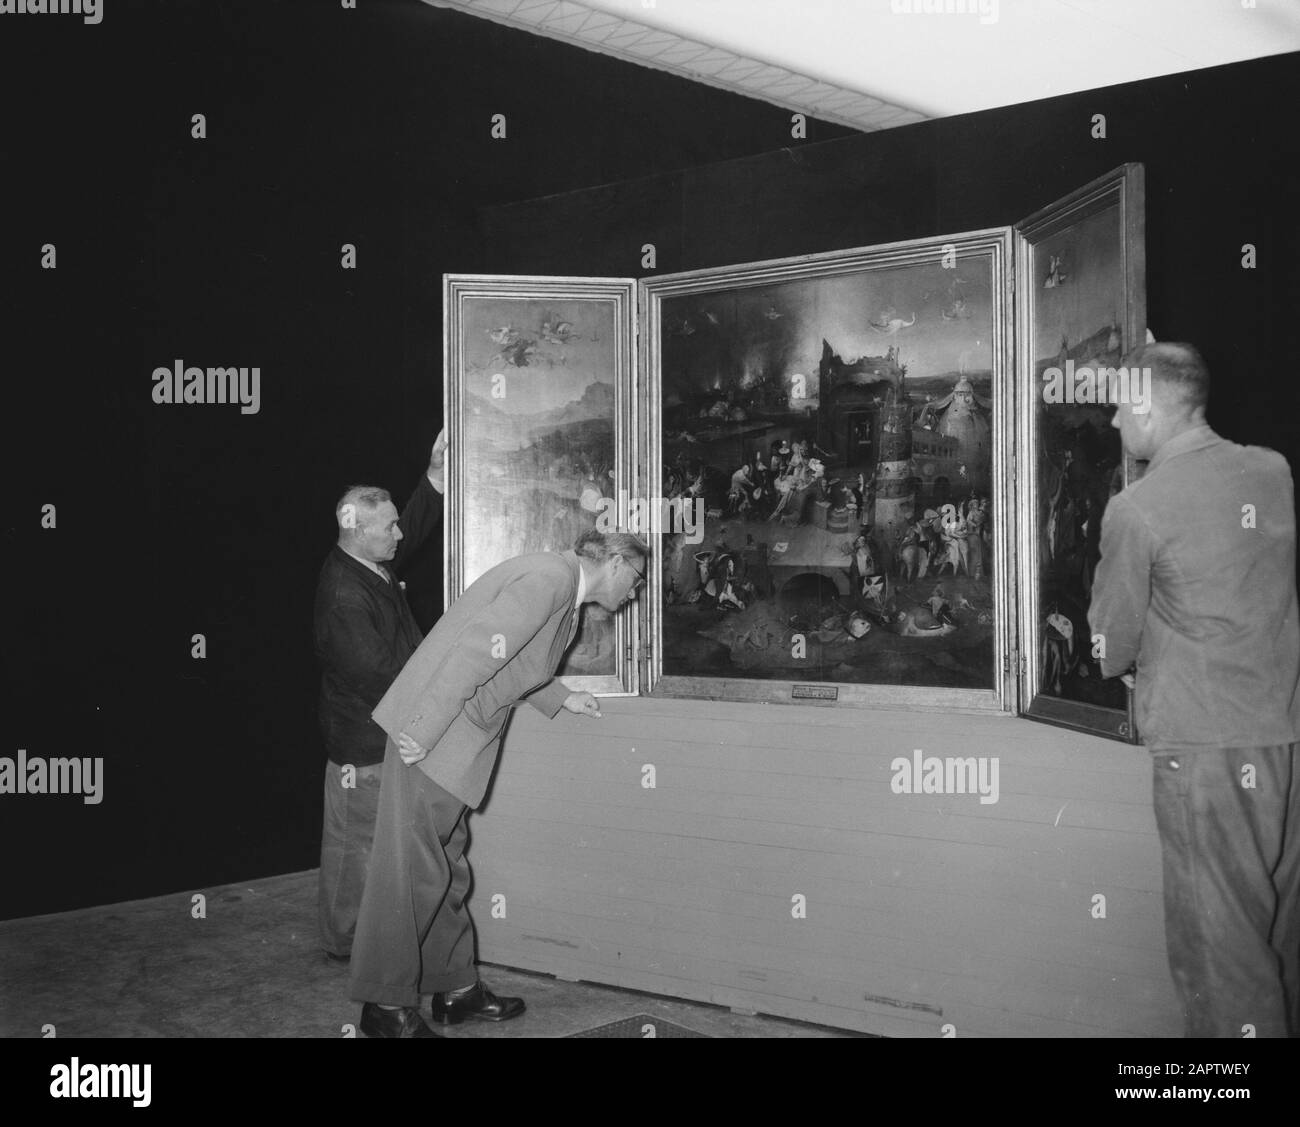 Setting up an anniversary exhibition in the Rijksmuseum on the 150 year anniversary of the Rijksmuseum, Anthonius altar triptych by Jeroen Bosch from Lisbon Date: 23 June 1958 Location: Amsterdam, Noord-Holland Keywords: anniversaries, art, museums, paintings Institution name: Rijksmuseum Stock Photo